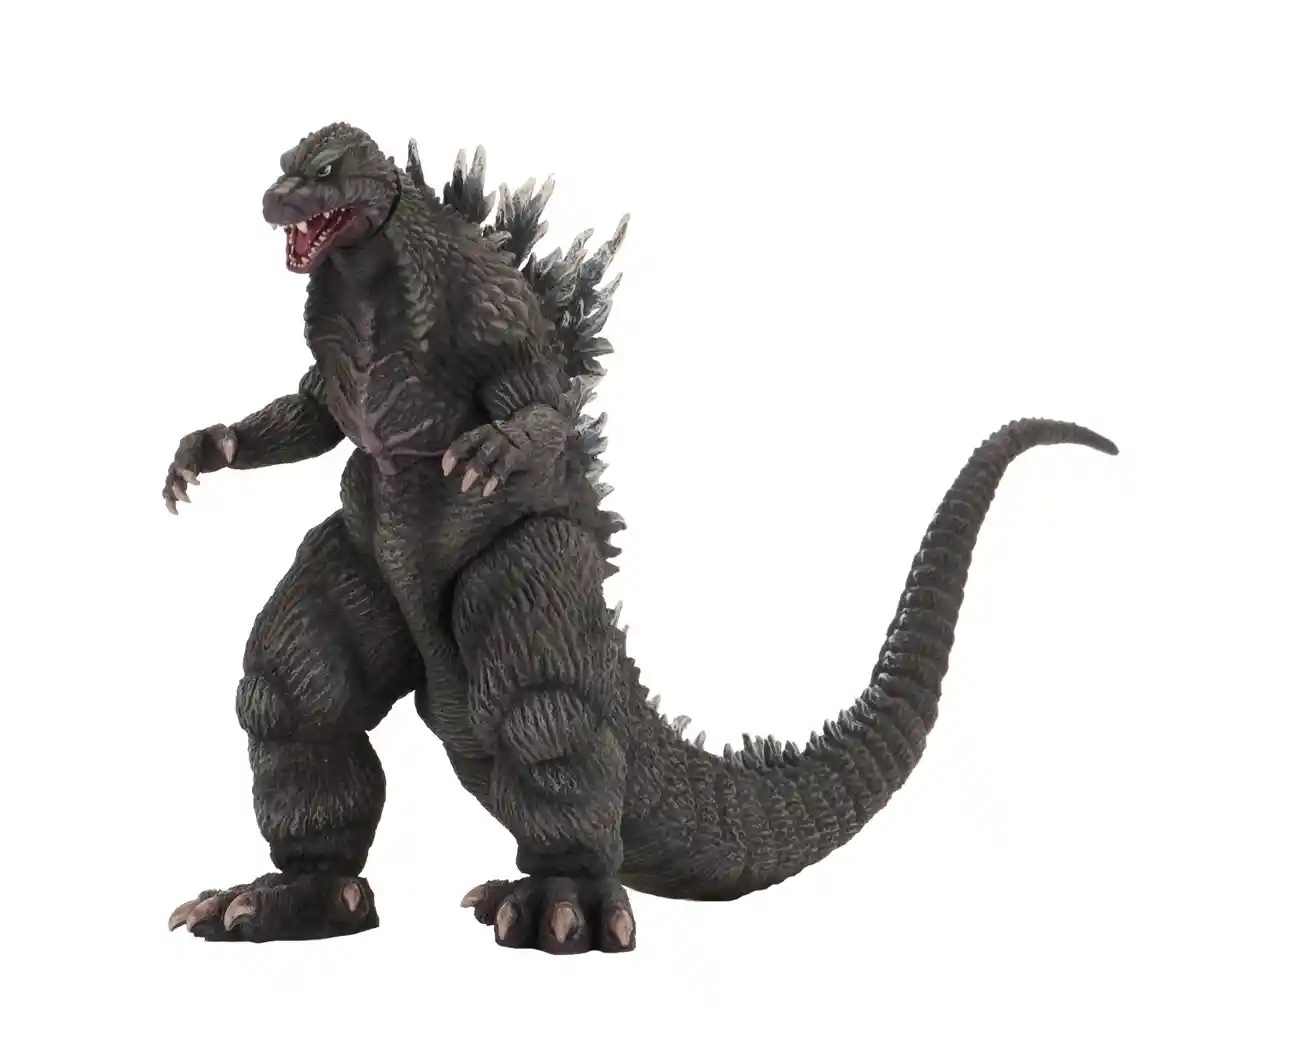 new official neca godzilla 1989 and 2003 images!